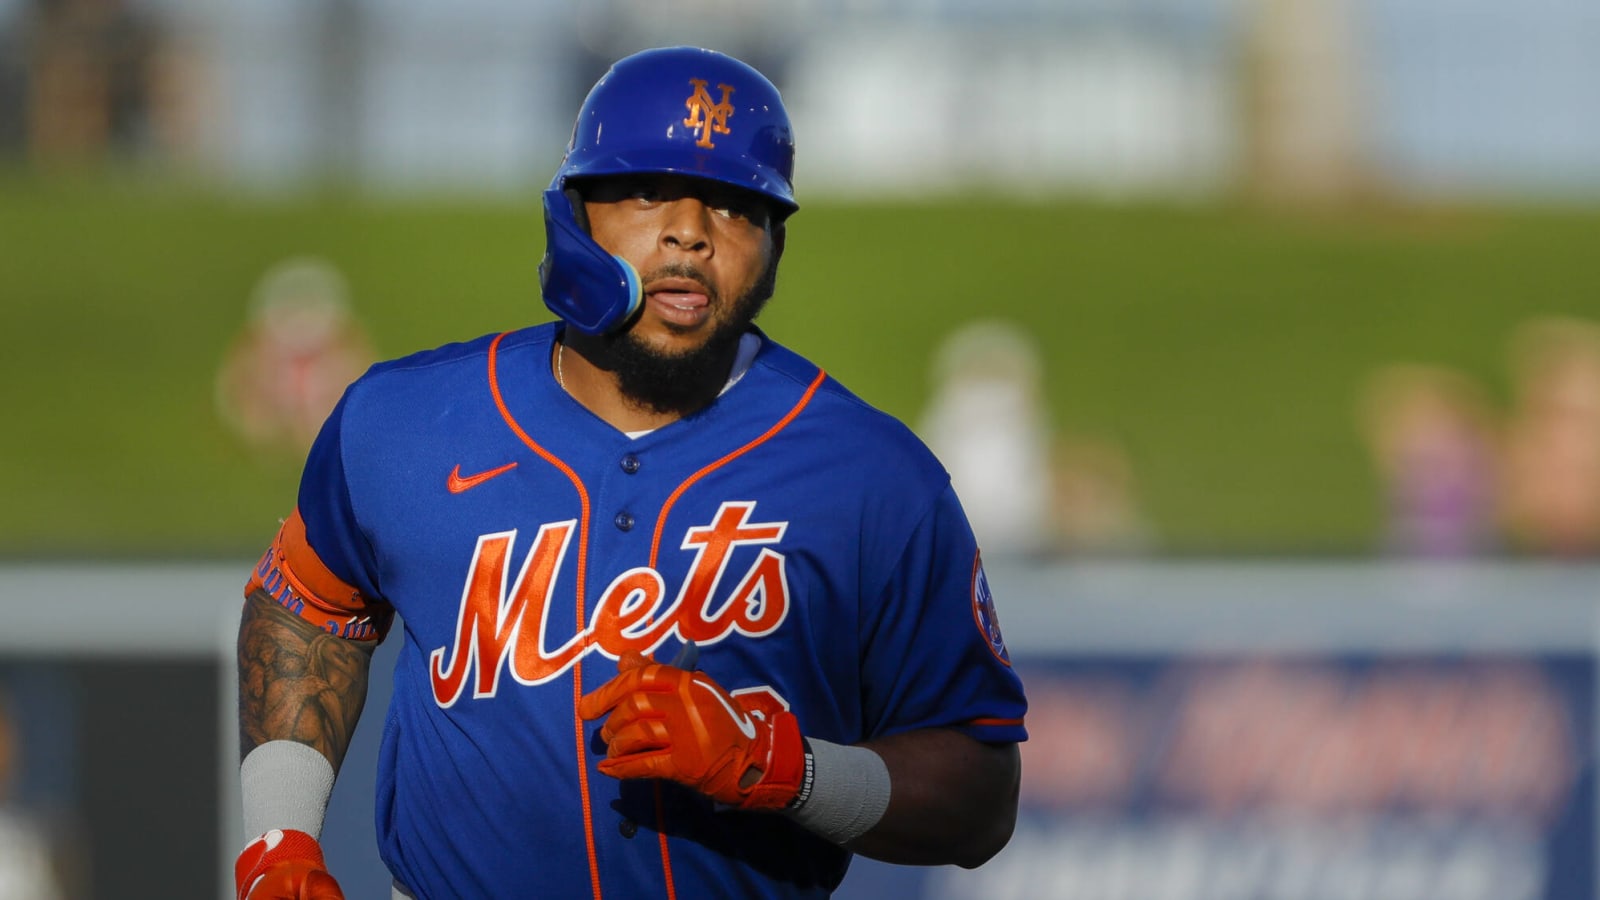 Mets' Dominic Smith vows: 'I’ll help this team win ballgames'